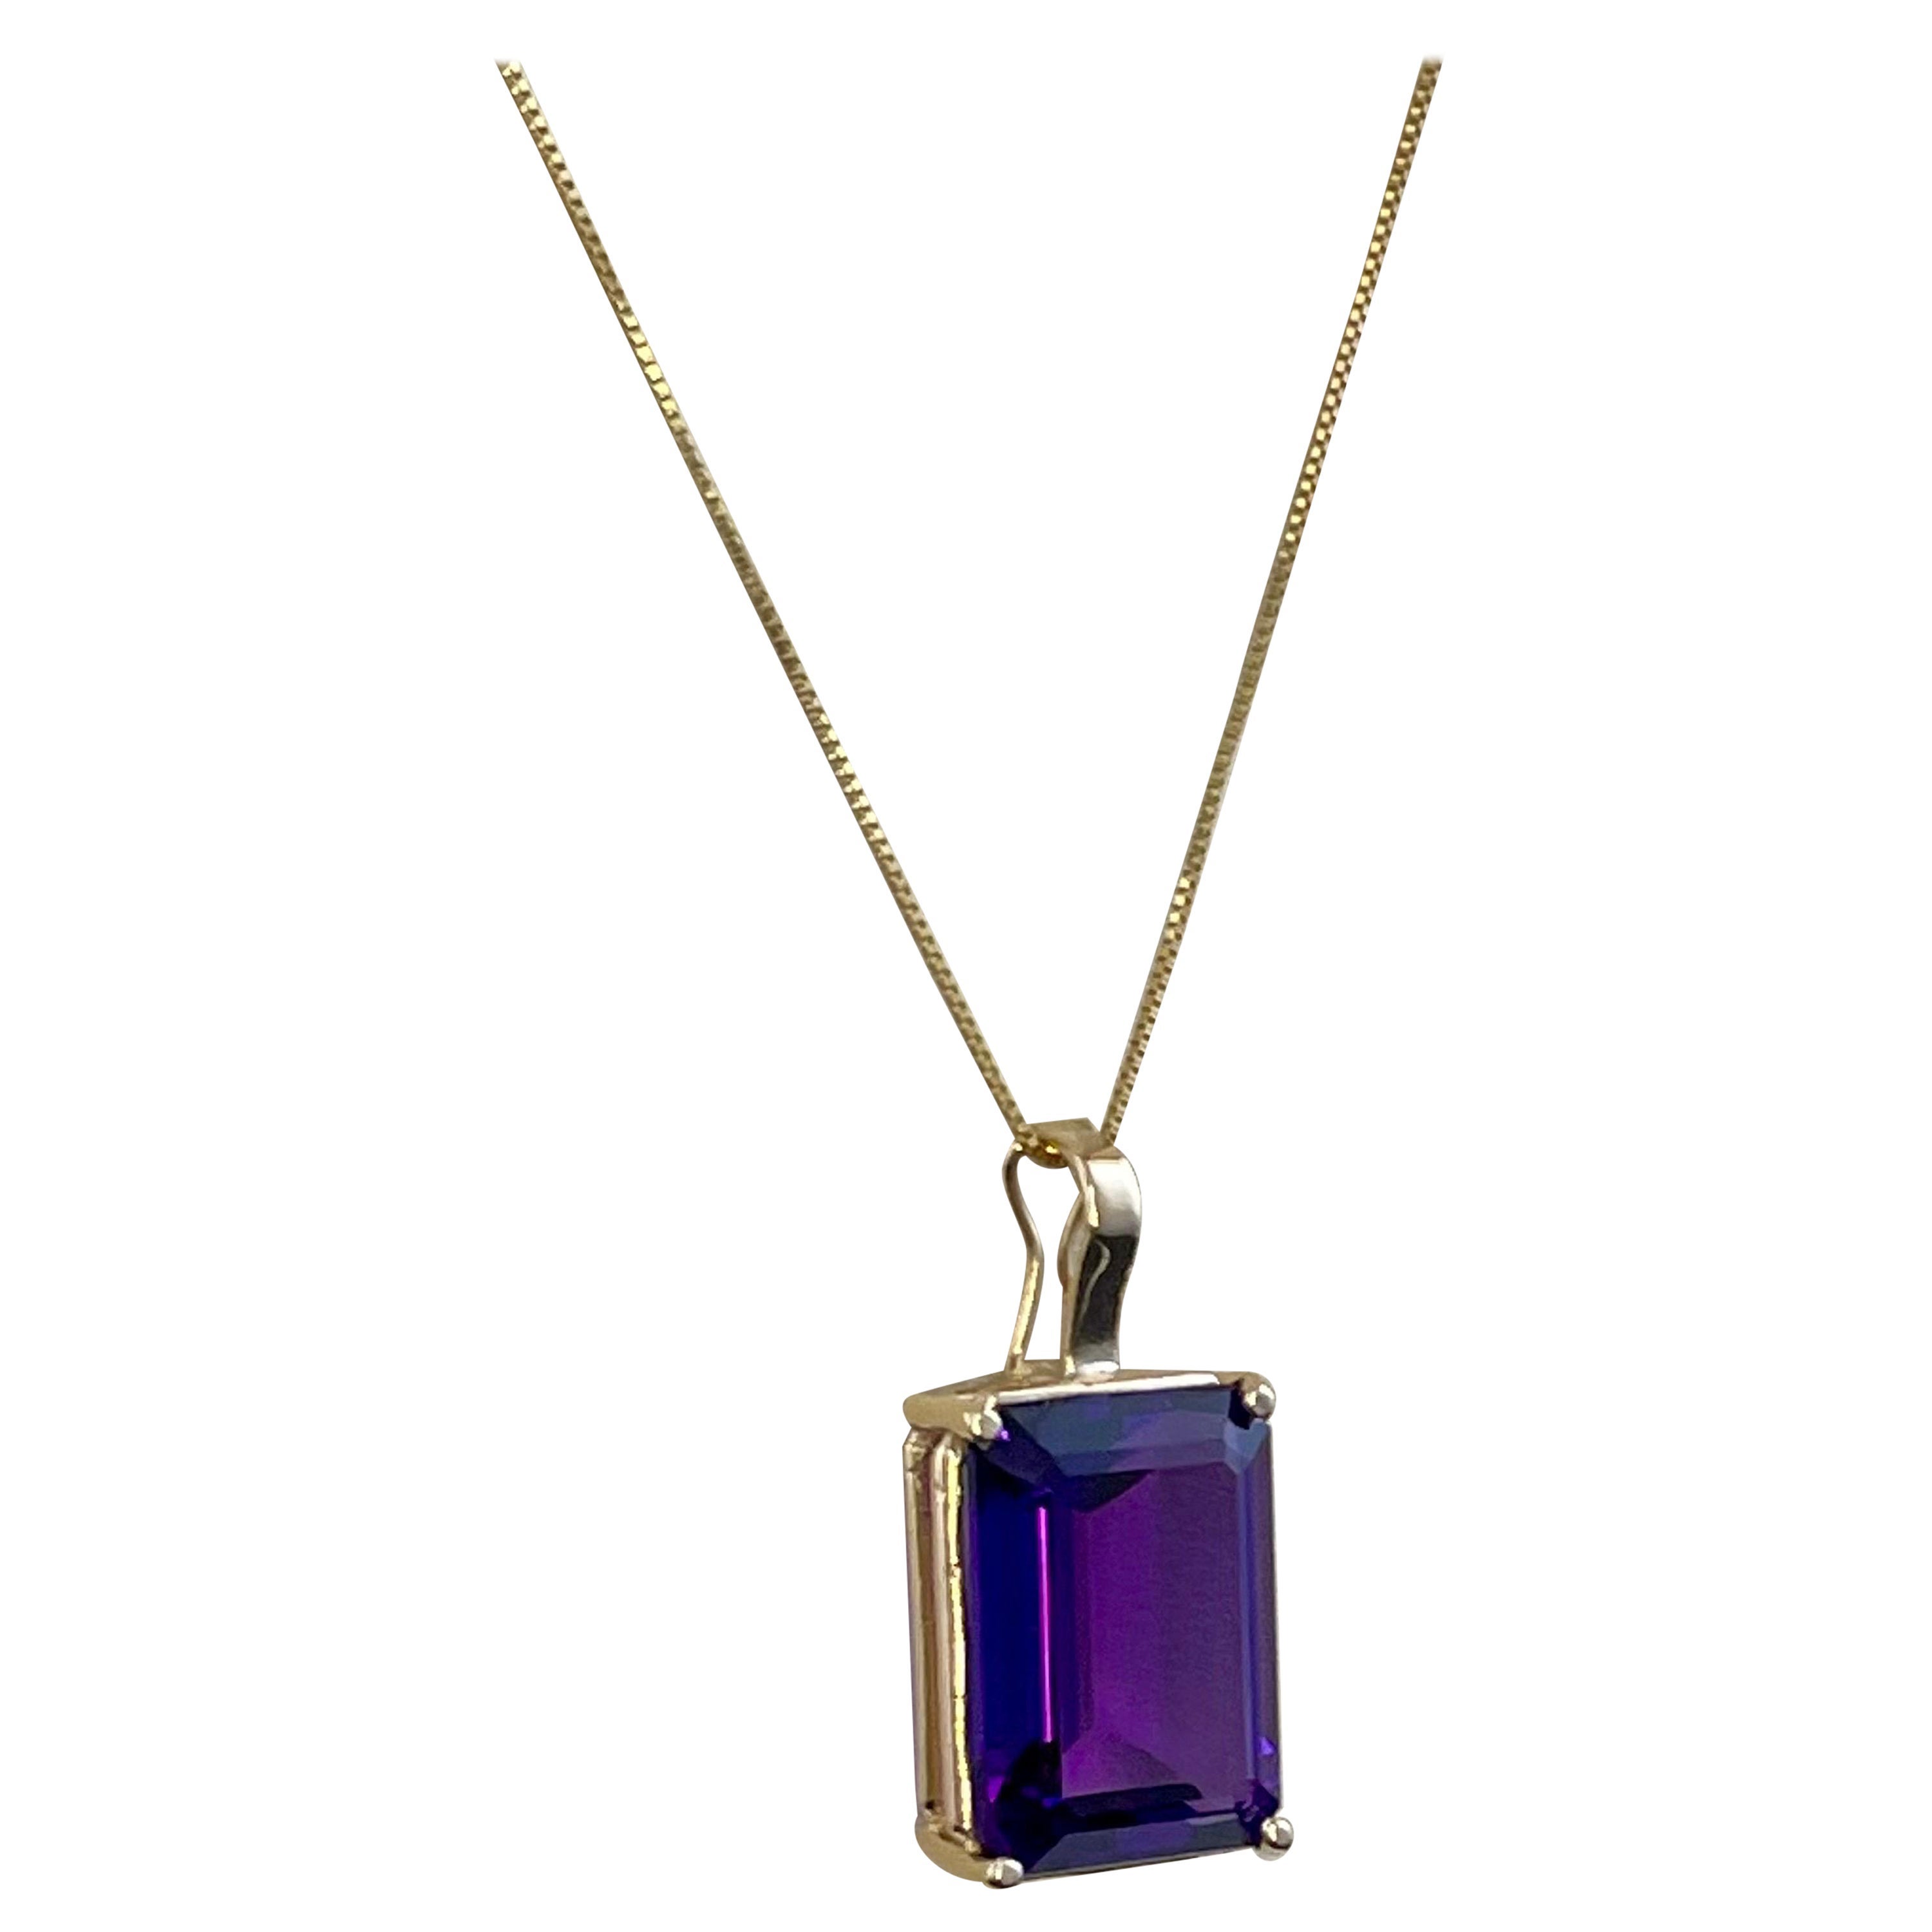  Approximately 14 Ct Emerald Cut Amethyst Pendant /Necklace 18Kt yellow gold  + 14 Kt Yellow Gold Chain Vintage
Chain is 14 Karat  yellow gold,
This spectacular Pendant Necklace  consisting of a single large Emerald  Cut Amethyst , approximately  14